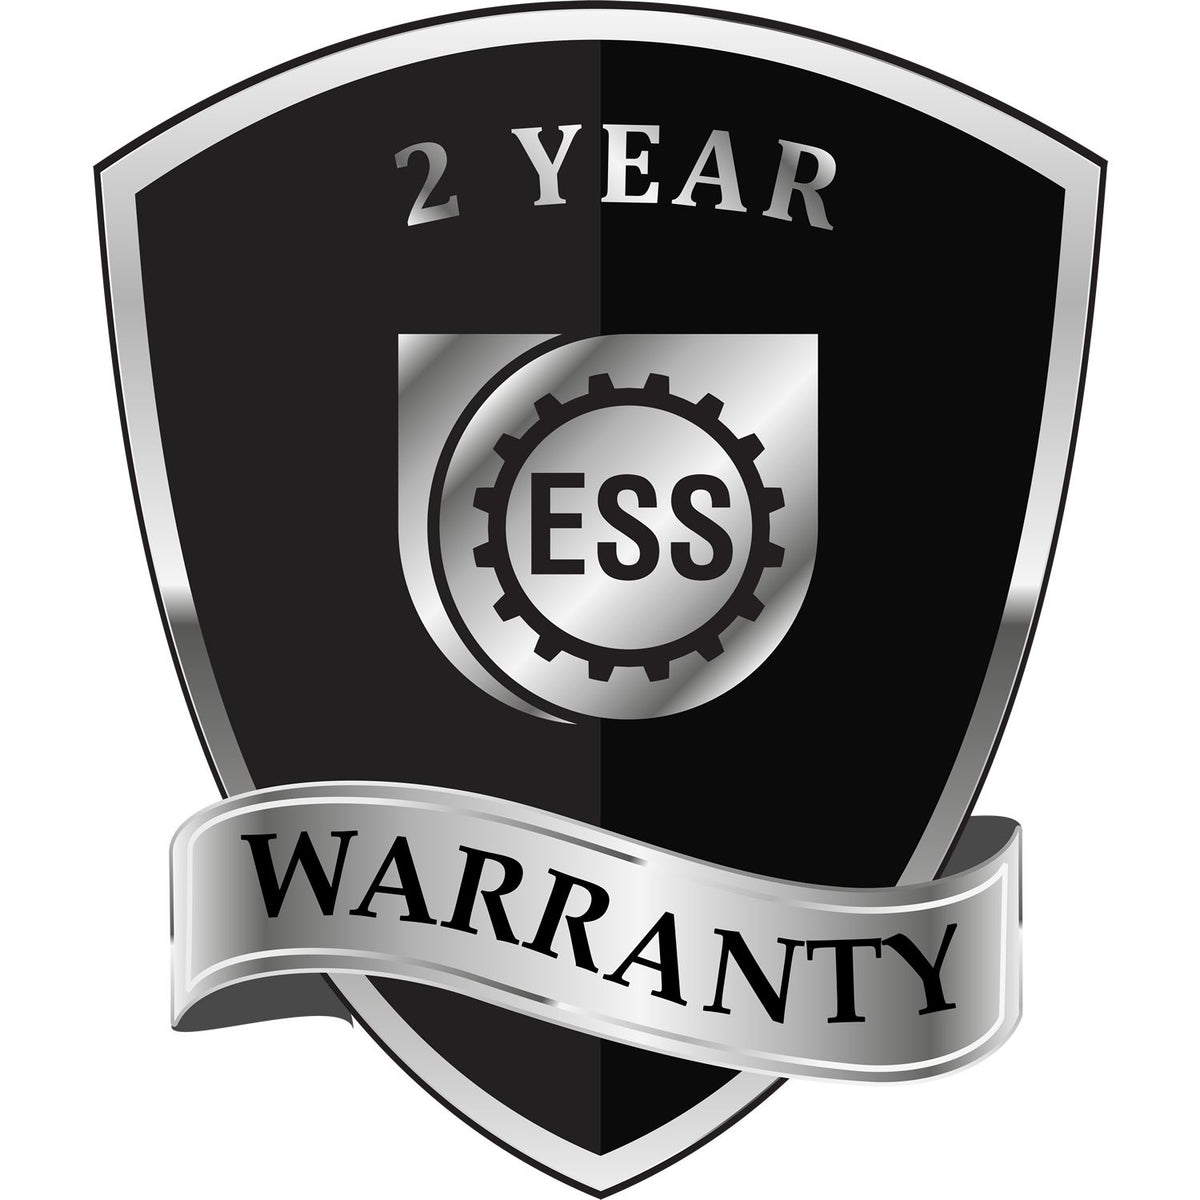 A badge or emblem showing a warranty icon for the Handheld New York Professional Engineer Embosser